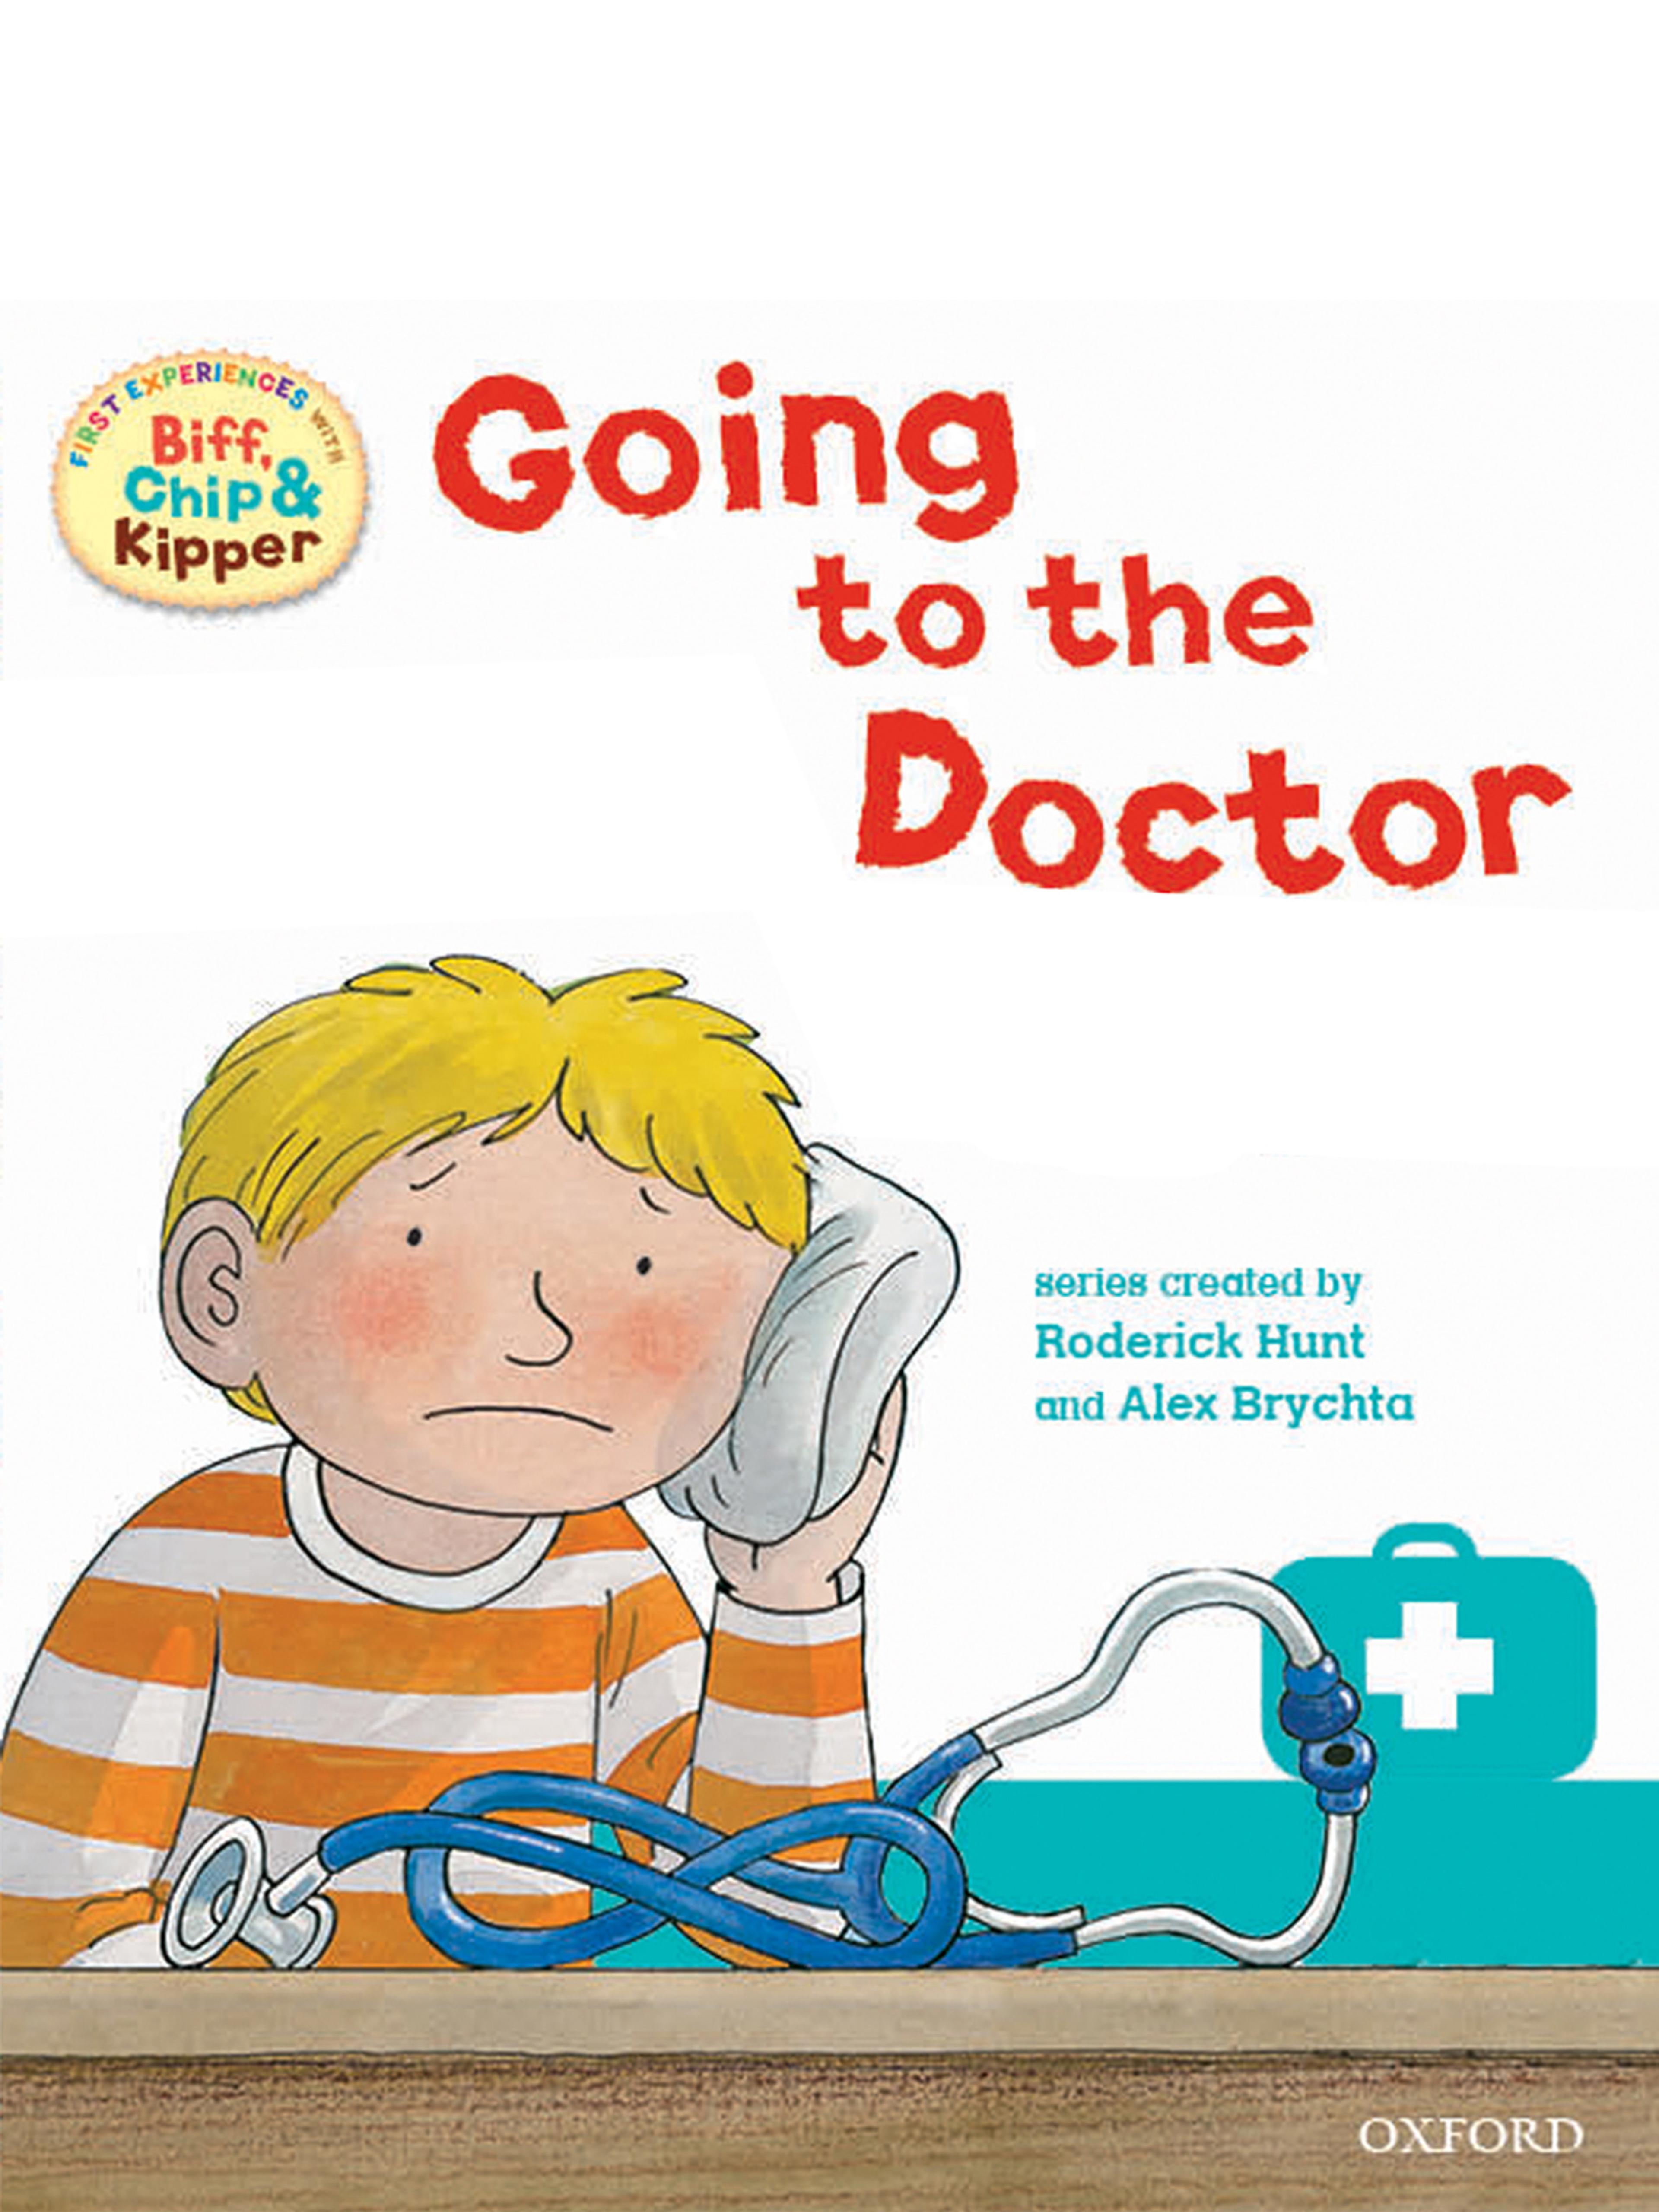 Biff, Chip and Kipper: Going to the Doctor